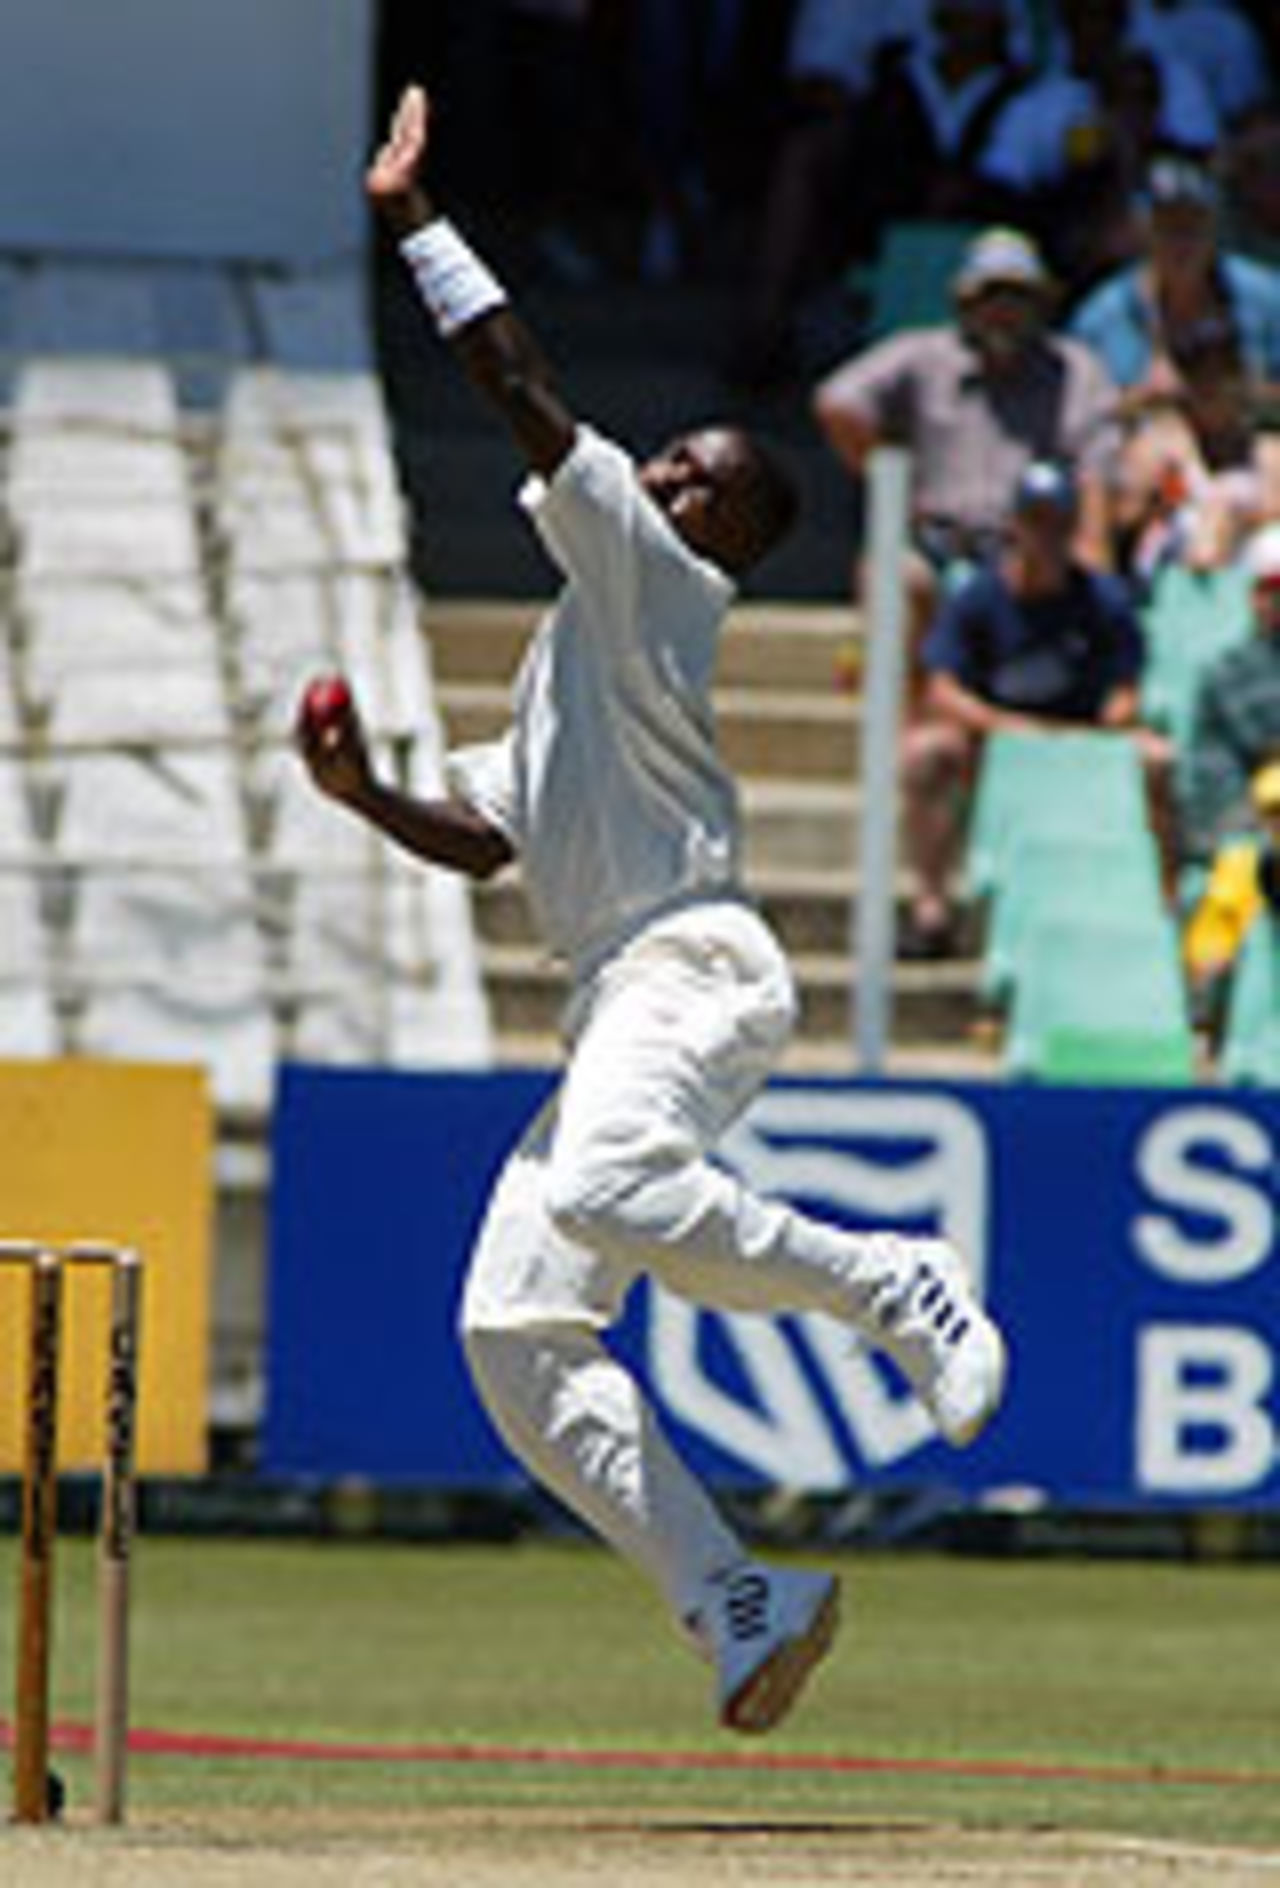 Fidel Edwards bounds in to bowl at Kingsmead, South Africa v West Indies, December 27, 2003